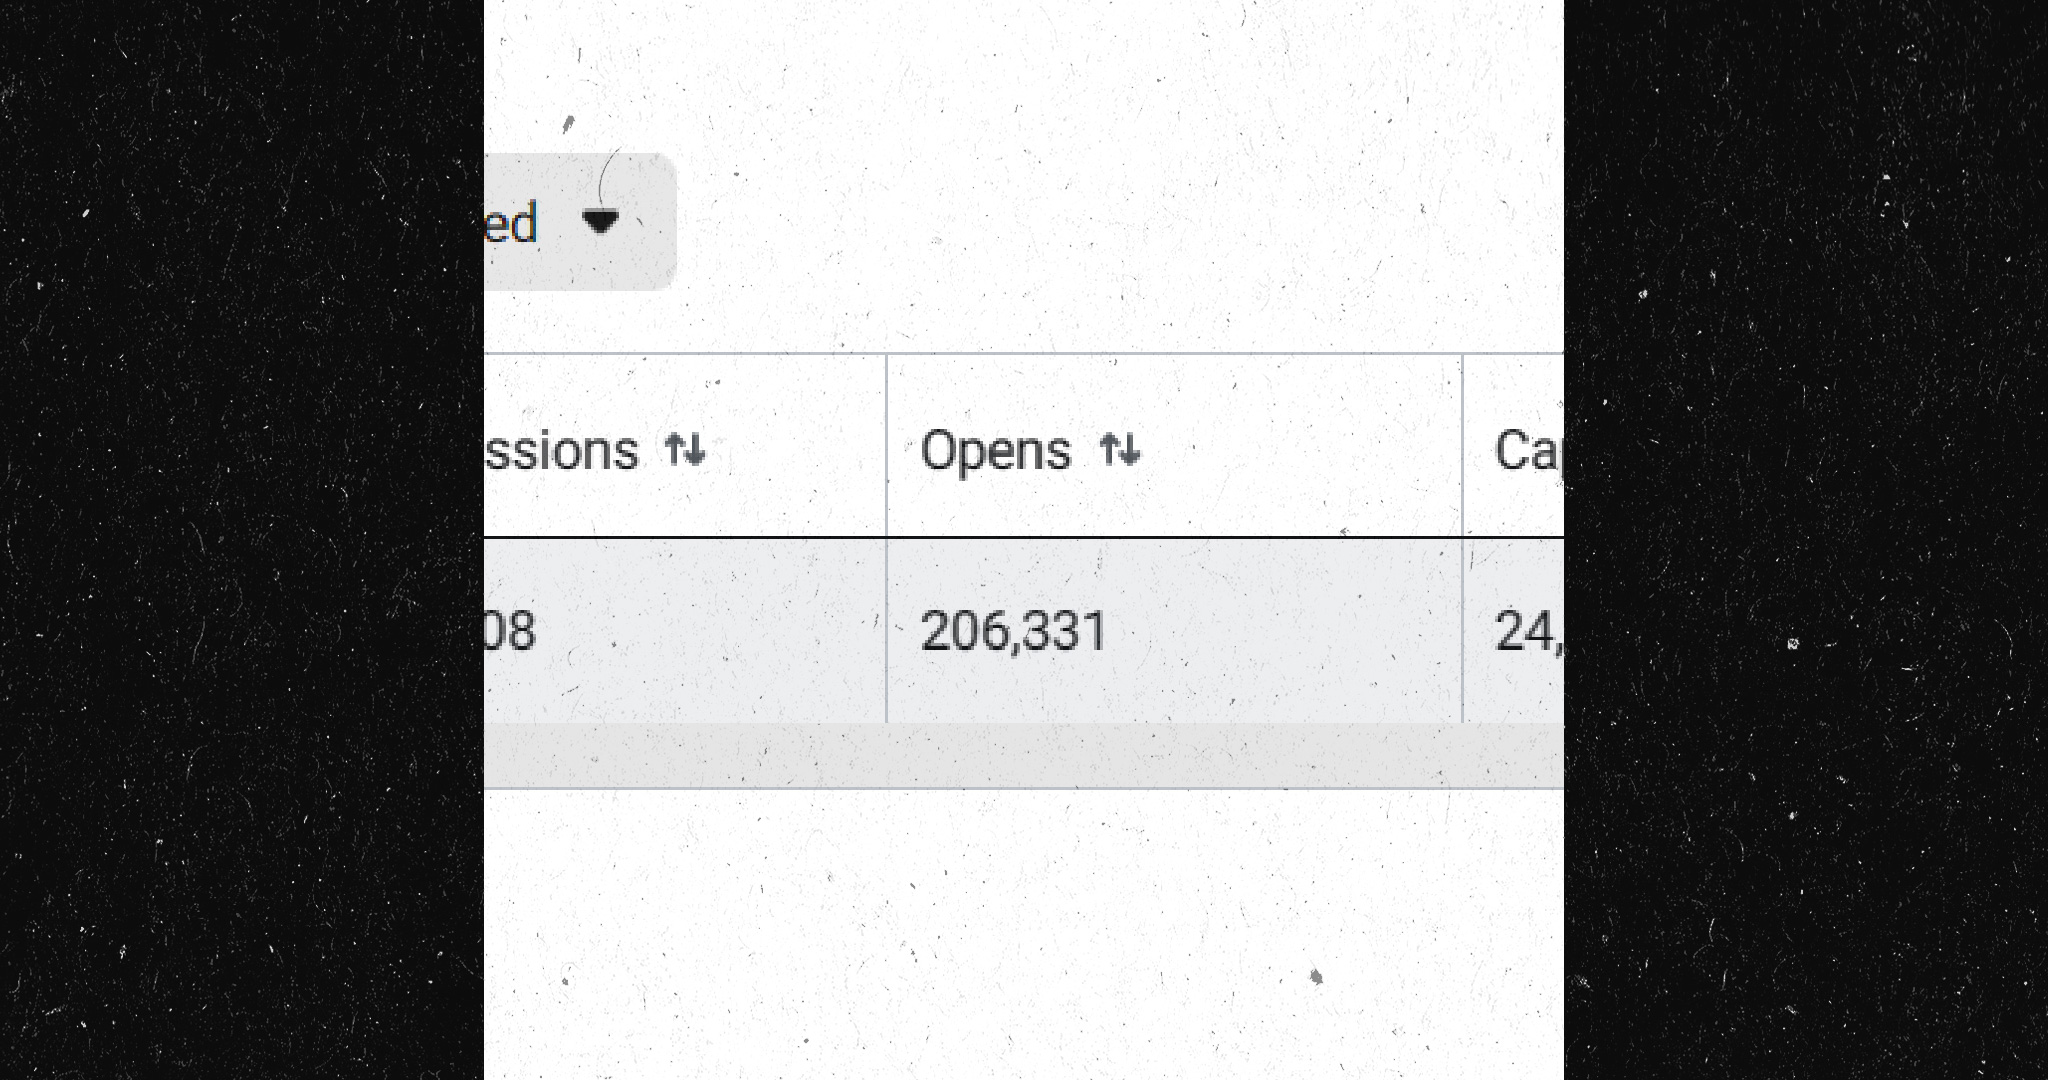 A screenshot of Spark AR Hub insights, showing that Acid has had 206,331 opens.